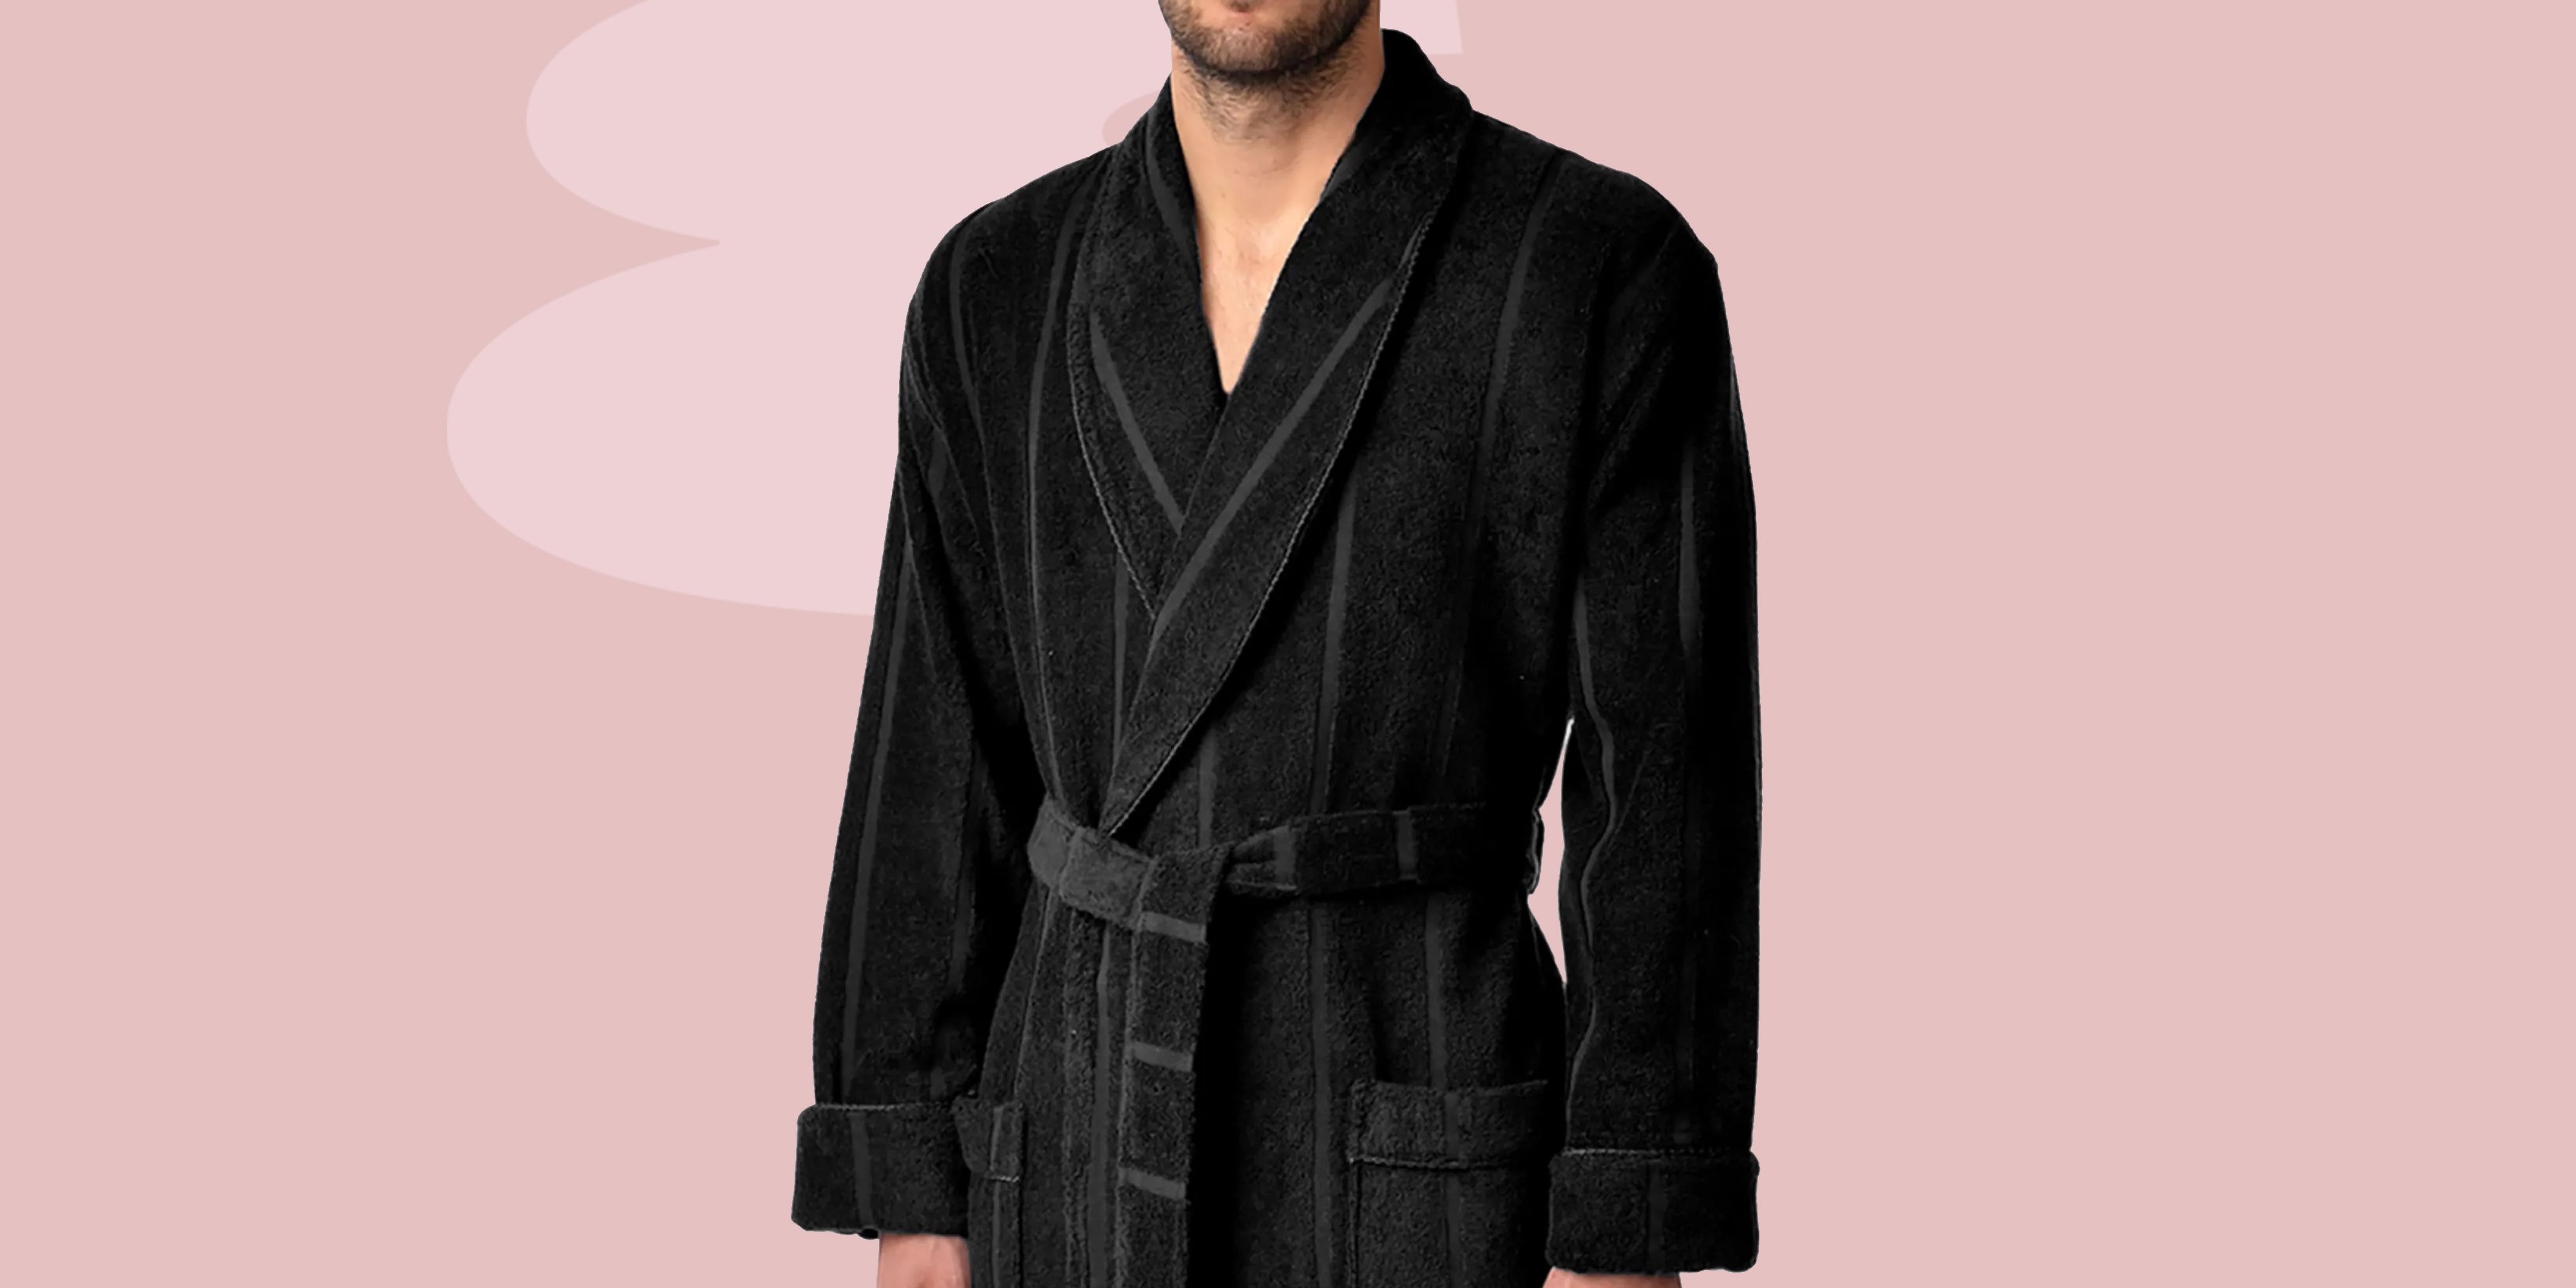 s #1 Selling Robes Are Up to 50% Off - Parade